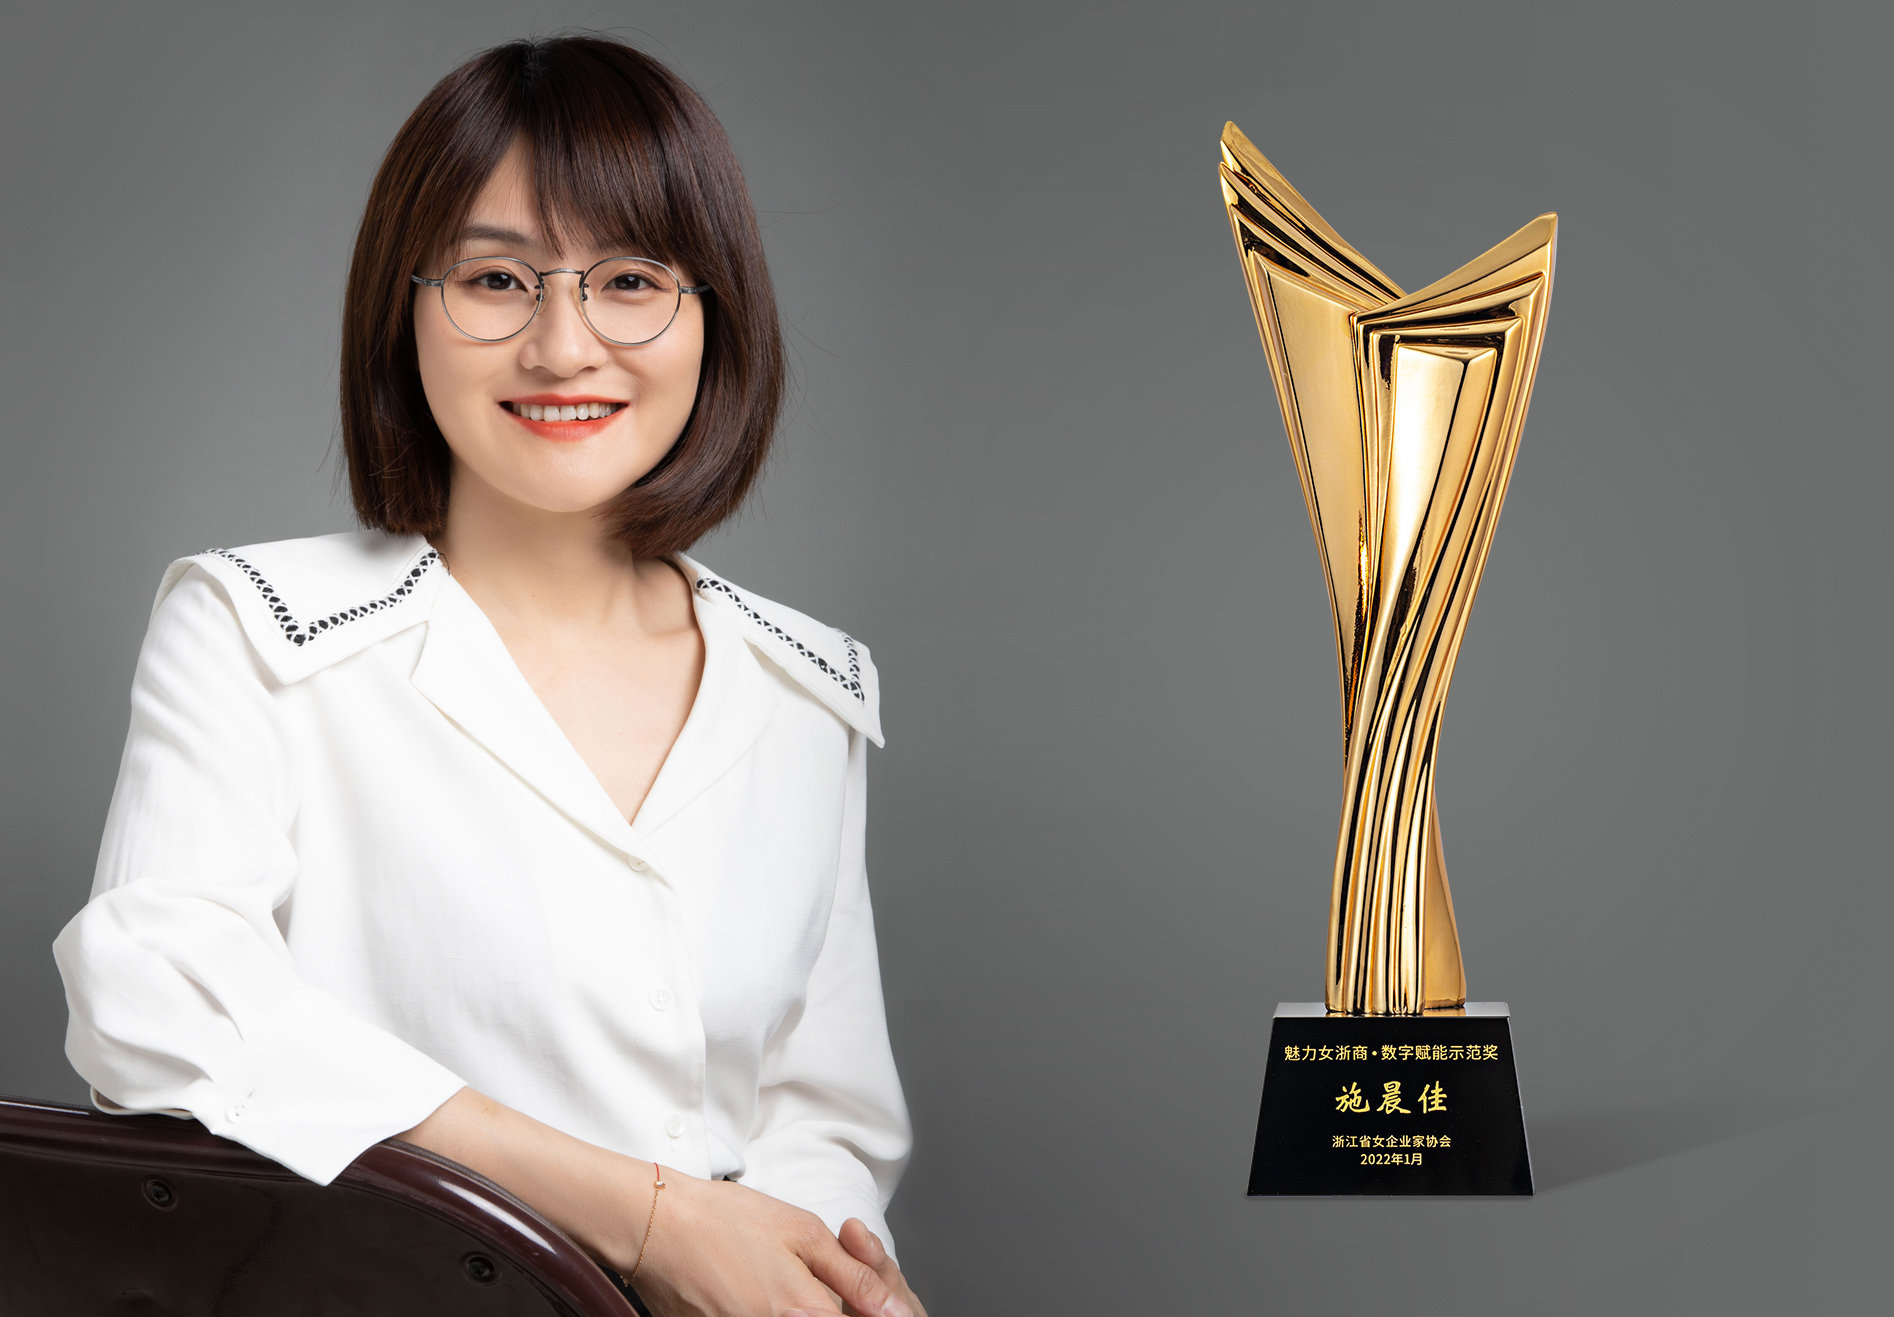 Congratulations|Ivy Shi, general manager of Ningshing Ubay, won the honorary title of 